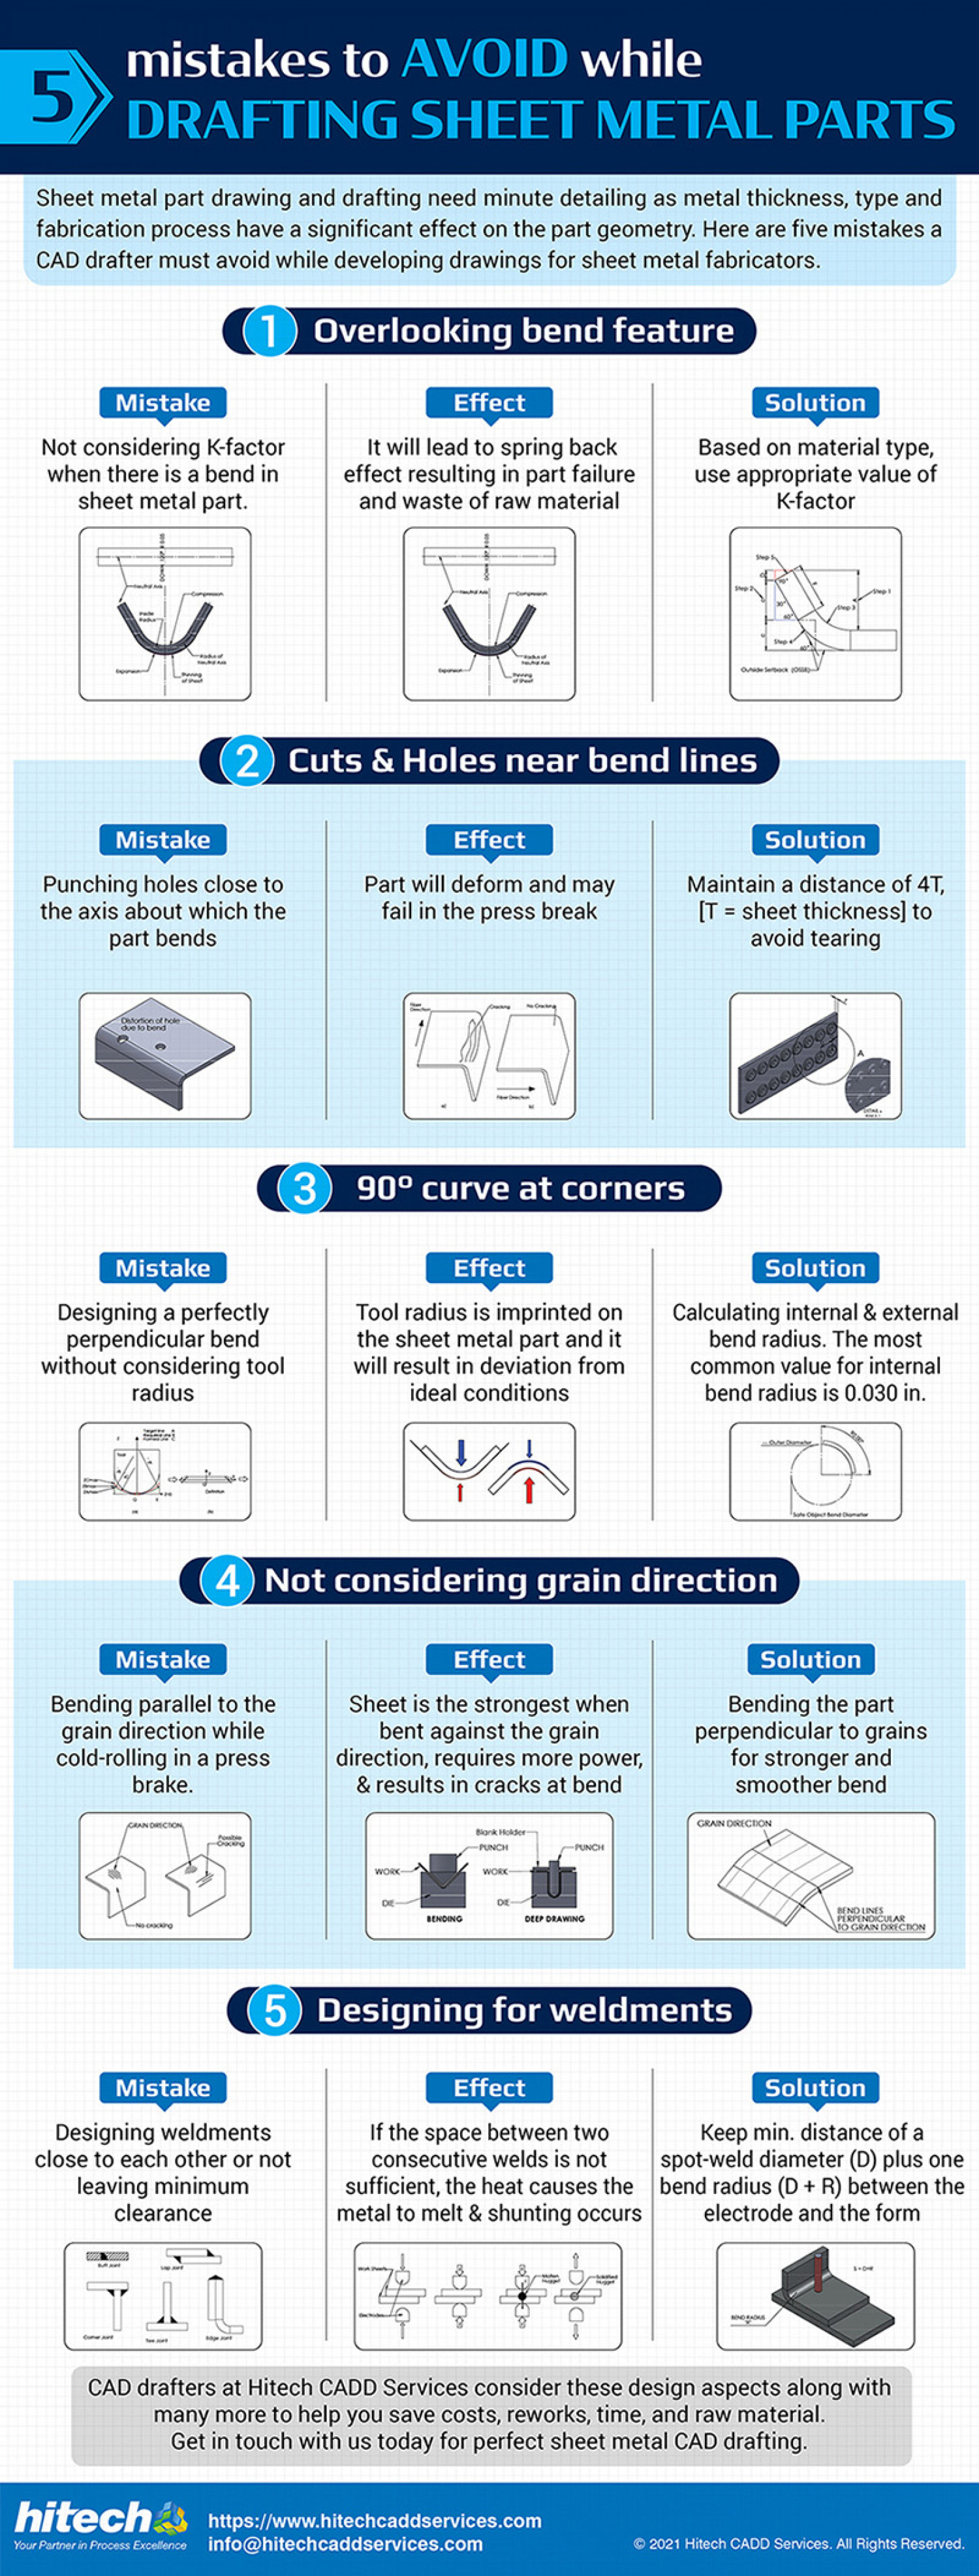 5 Mistakes to avoid when drafting sheet metal parts Infographic